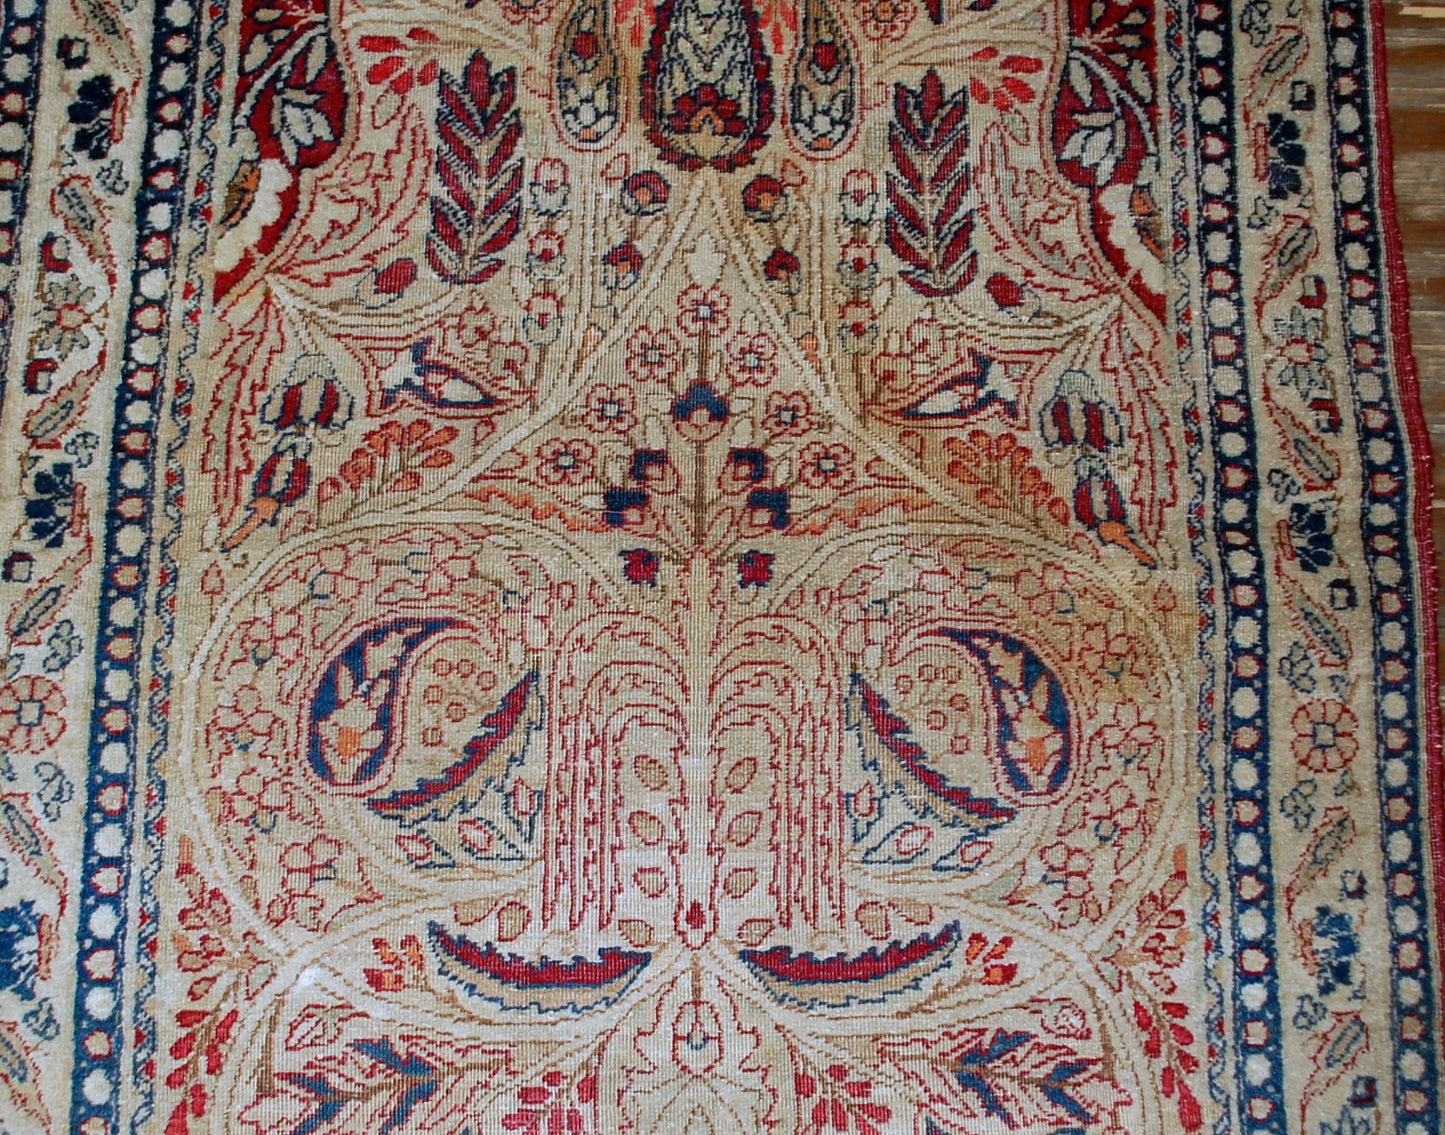 Persian Kerman Lavar rug in original condition, it has some low pile. The rug is prayer in beige and burgundy shades, made in the end of 19th century.